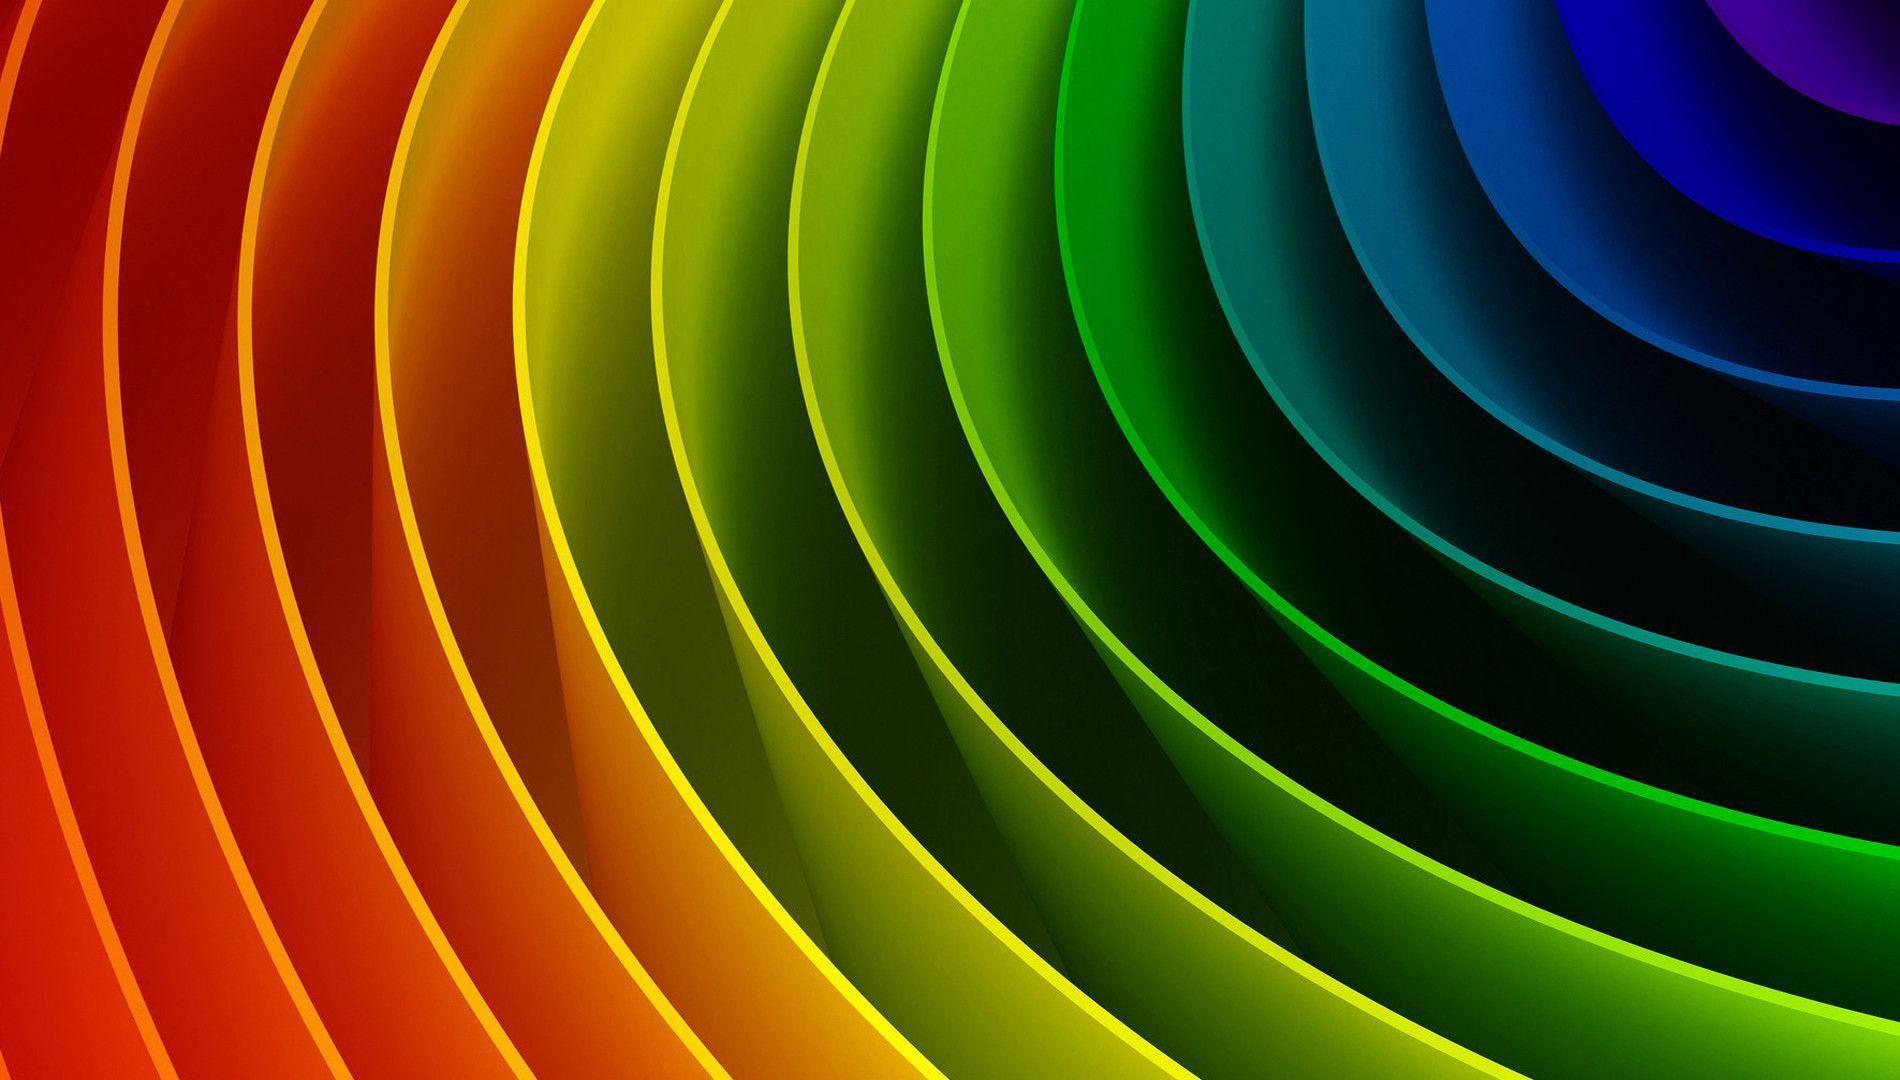 Wallpaper For > Wallpaper HD Abstract Color